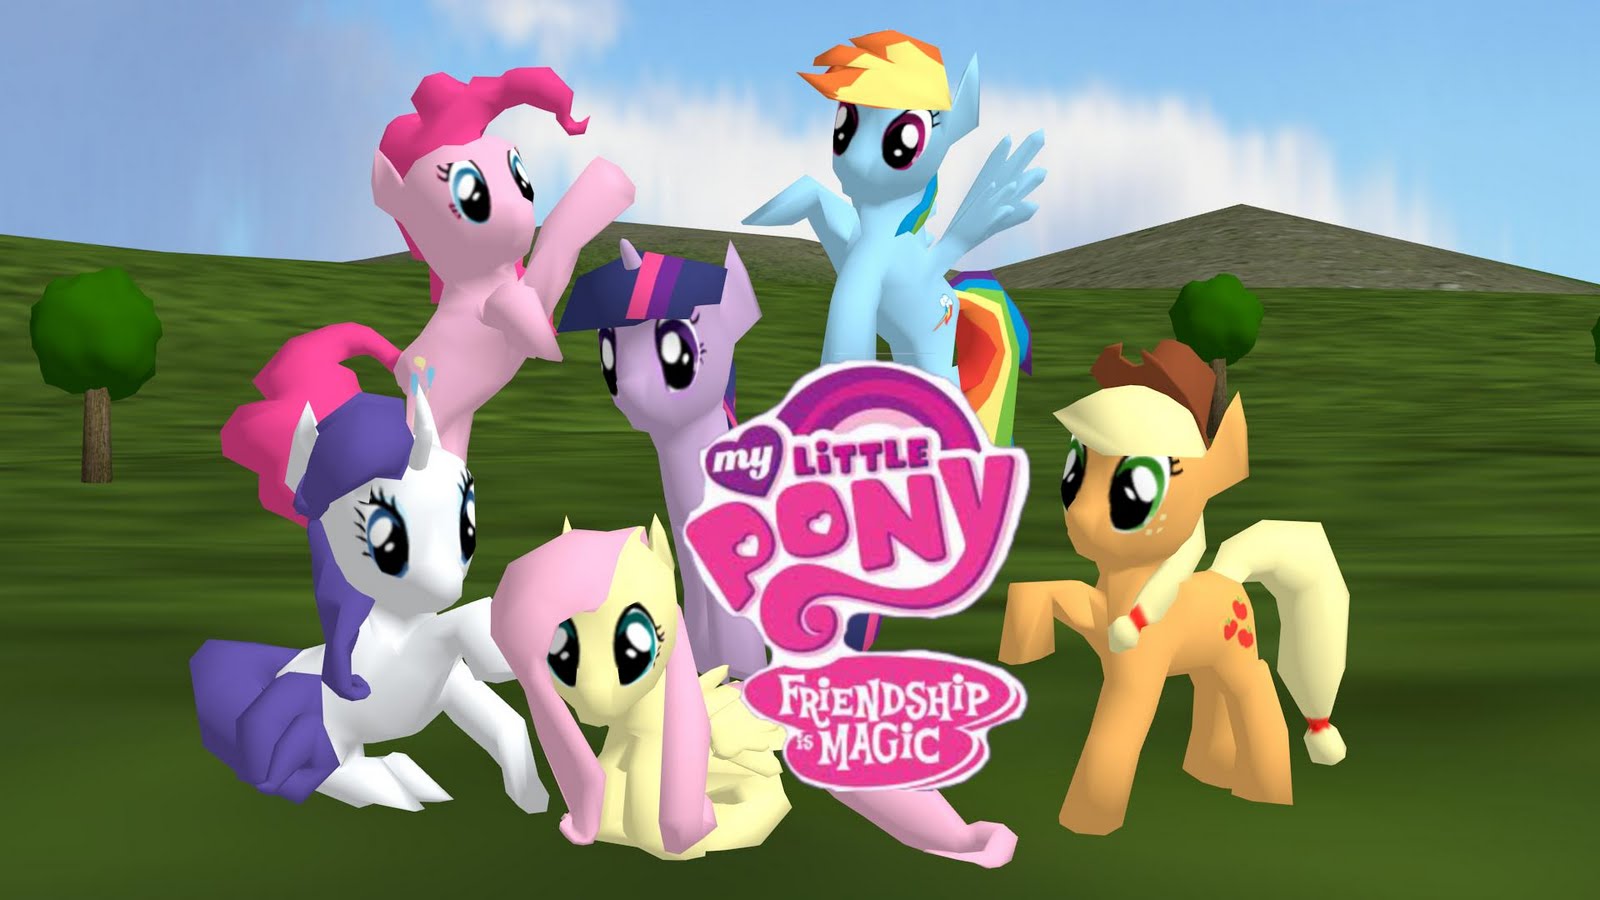 My Little Pony Games Online - Play for Free on Play-Games.com